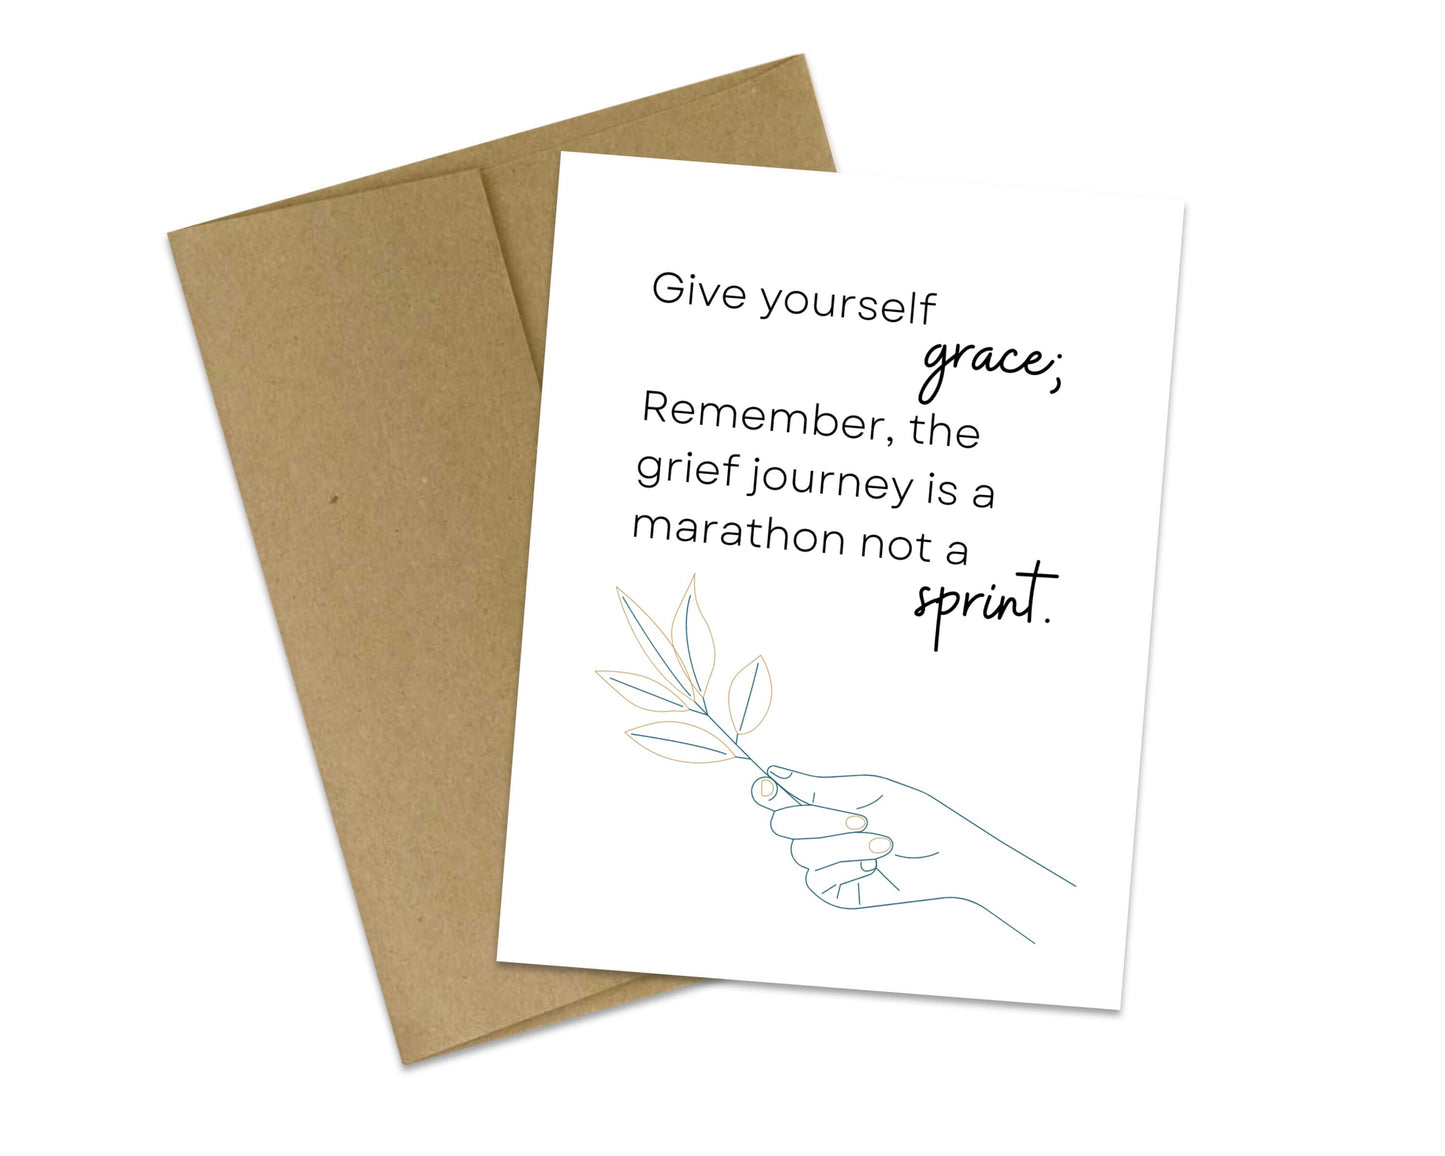 Give yourself grace - Remember, the grief journey is a marathon not a sprint